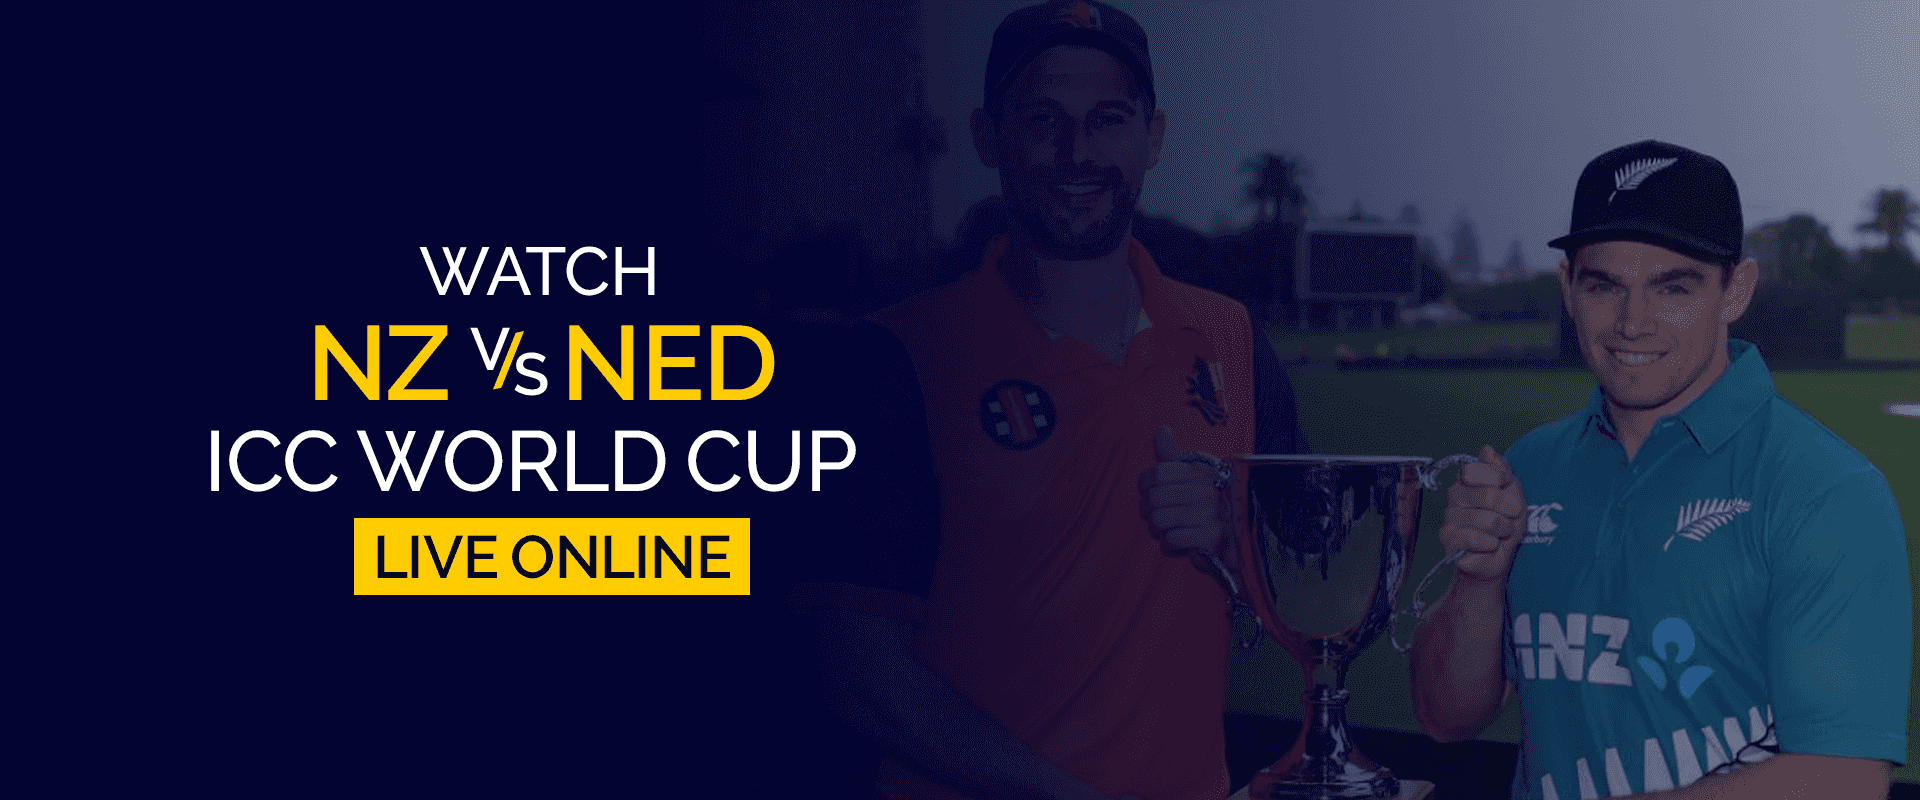 Watch NZ vs NED ICC World Cup Live Online